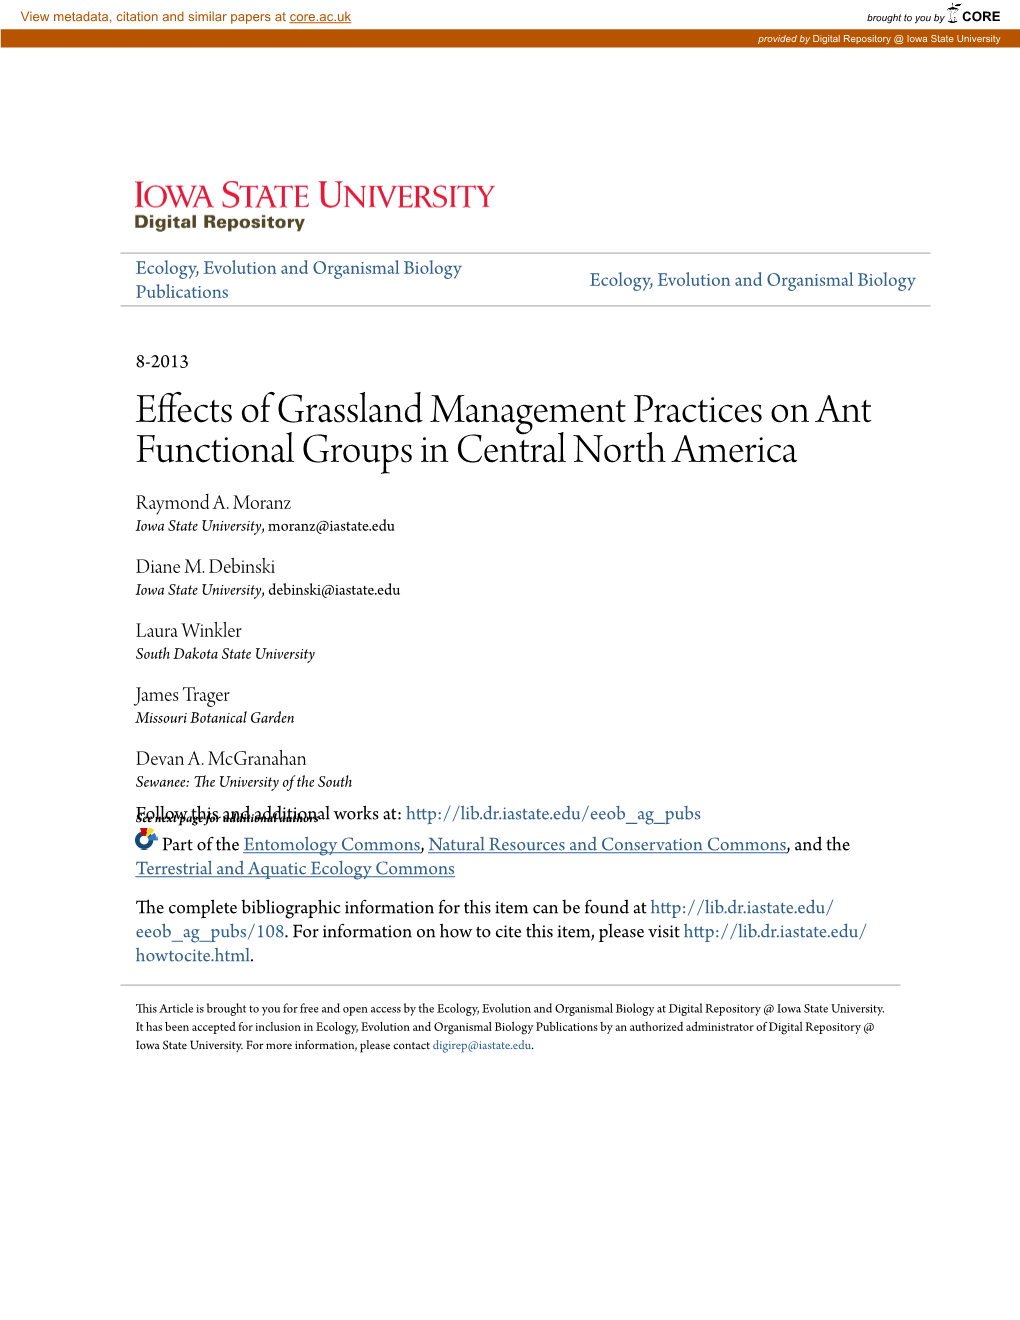 Effects of Grassland Management Practices on Ant Functional Groups in Central North America Raymond A